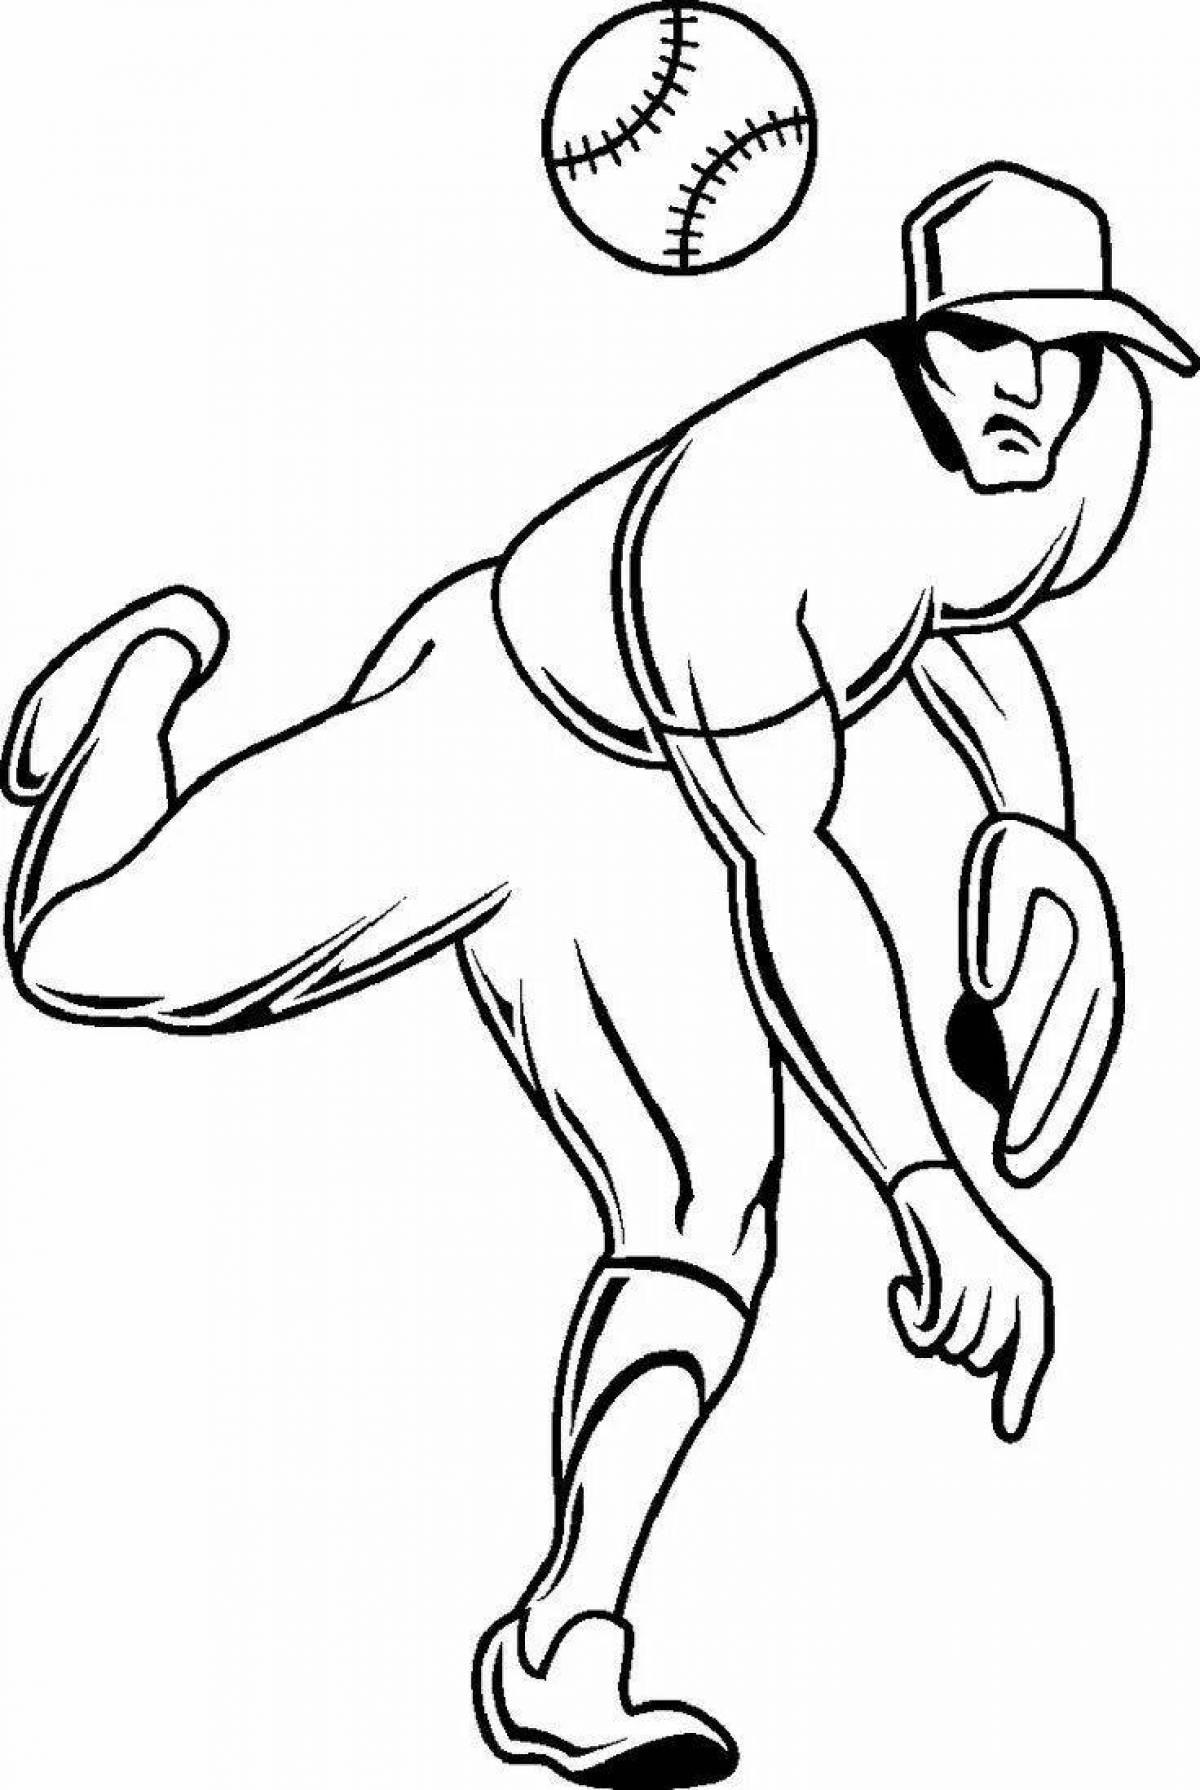 Bold sportsmen coloring pages